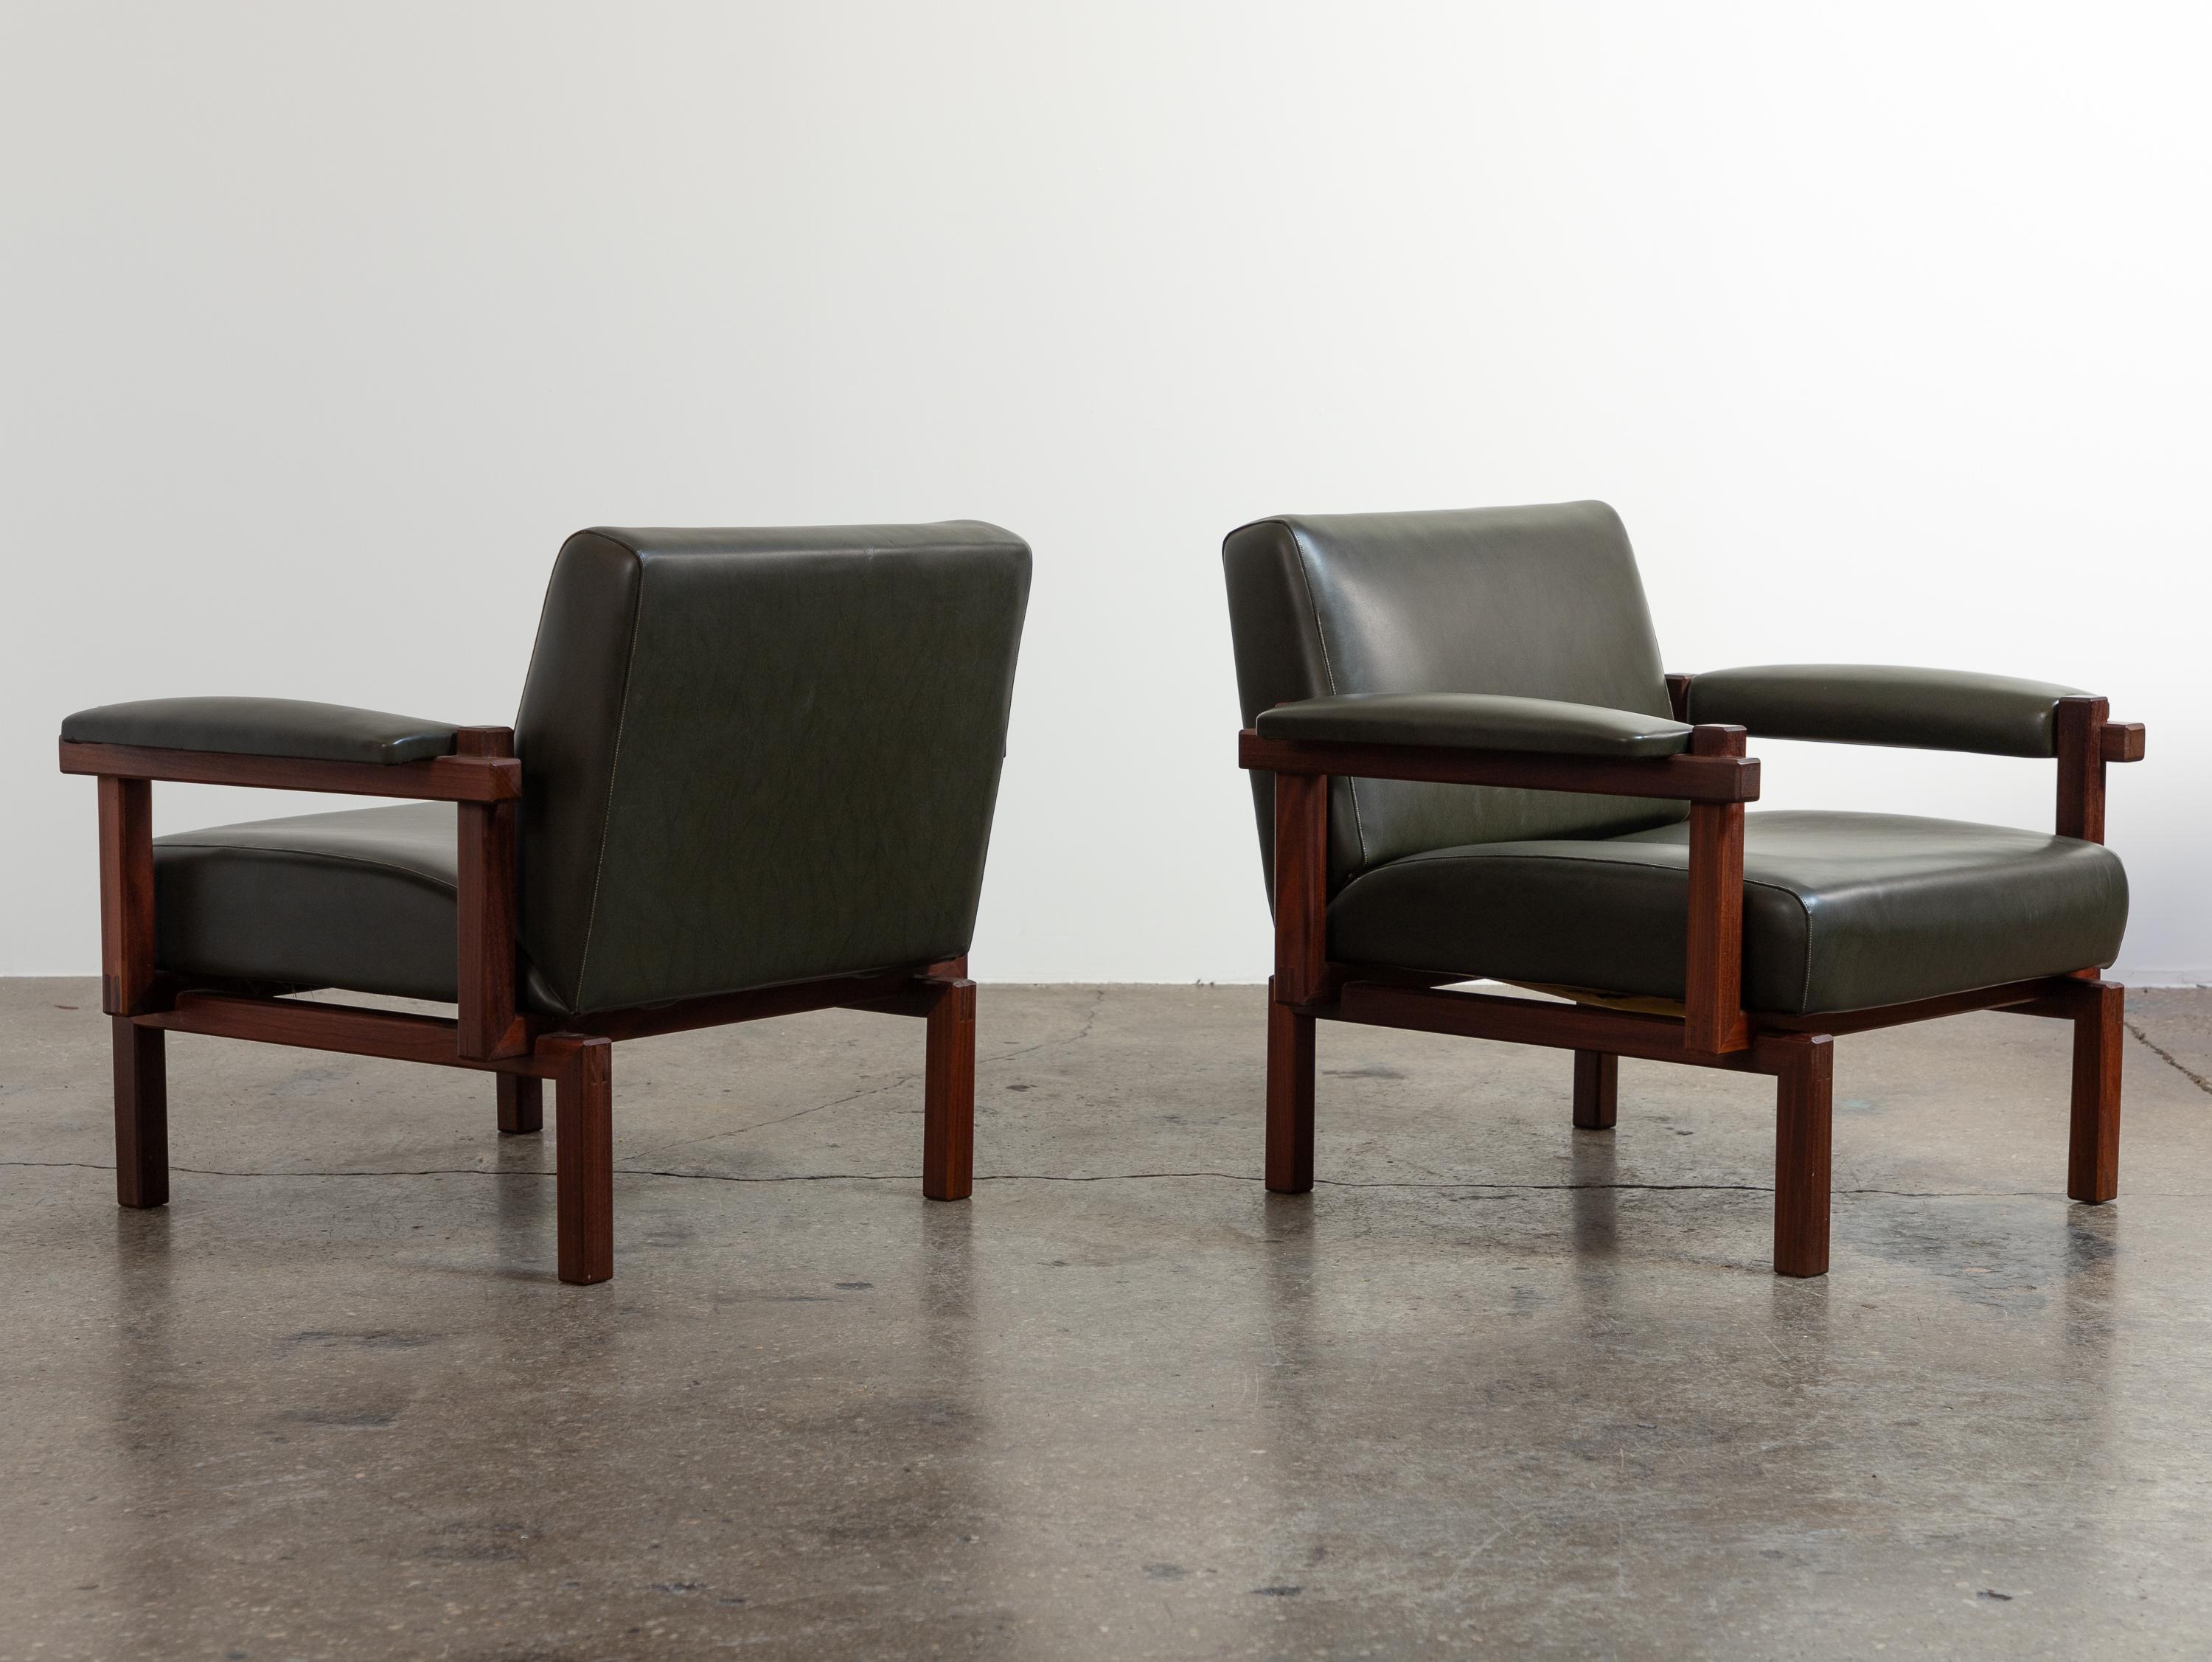 Wonderful pair of Grazia lounge chairs, designed by Raffaella Crespi for Elam. Crafted from fine Italian walnut, the open-frame design showcases an intriguing constructivist influence. These elegant chairs feature a low profile and generous cushions